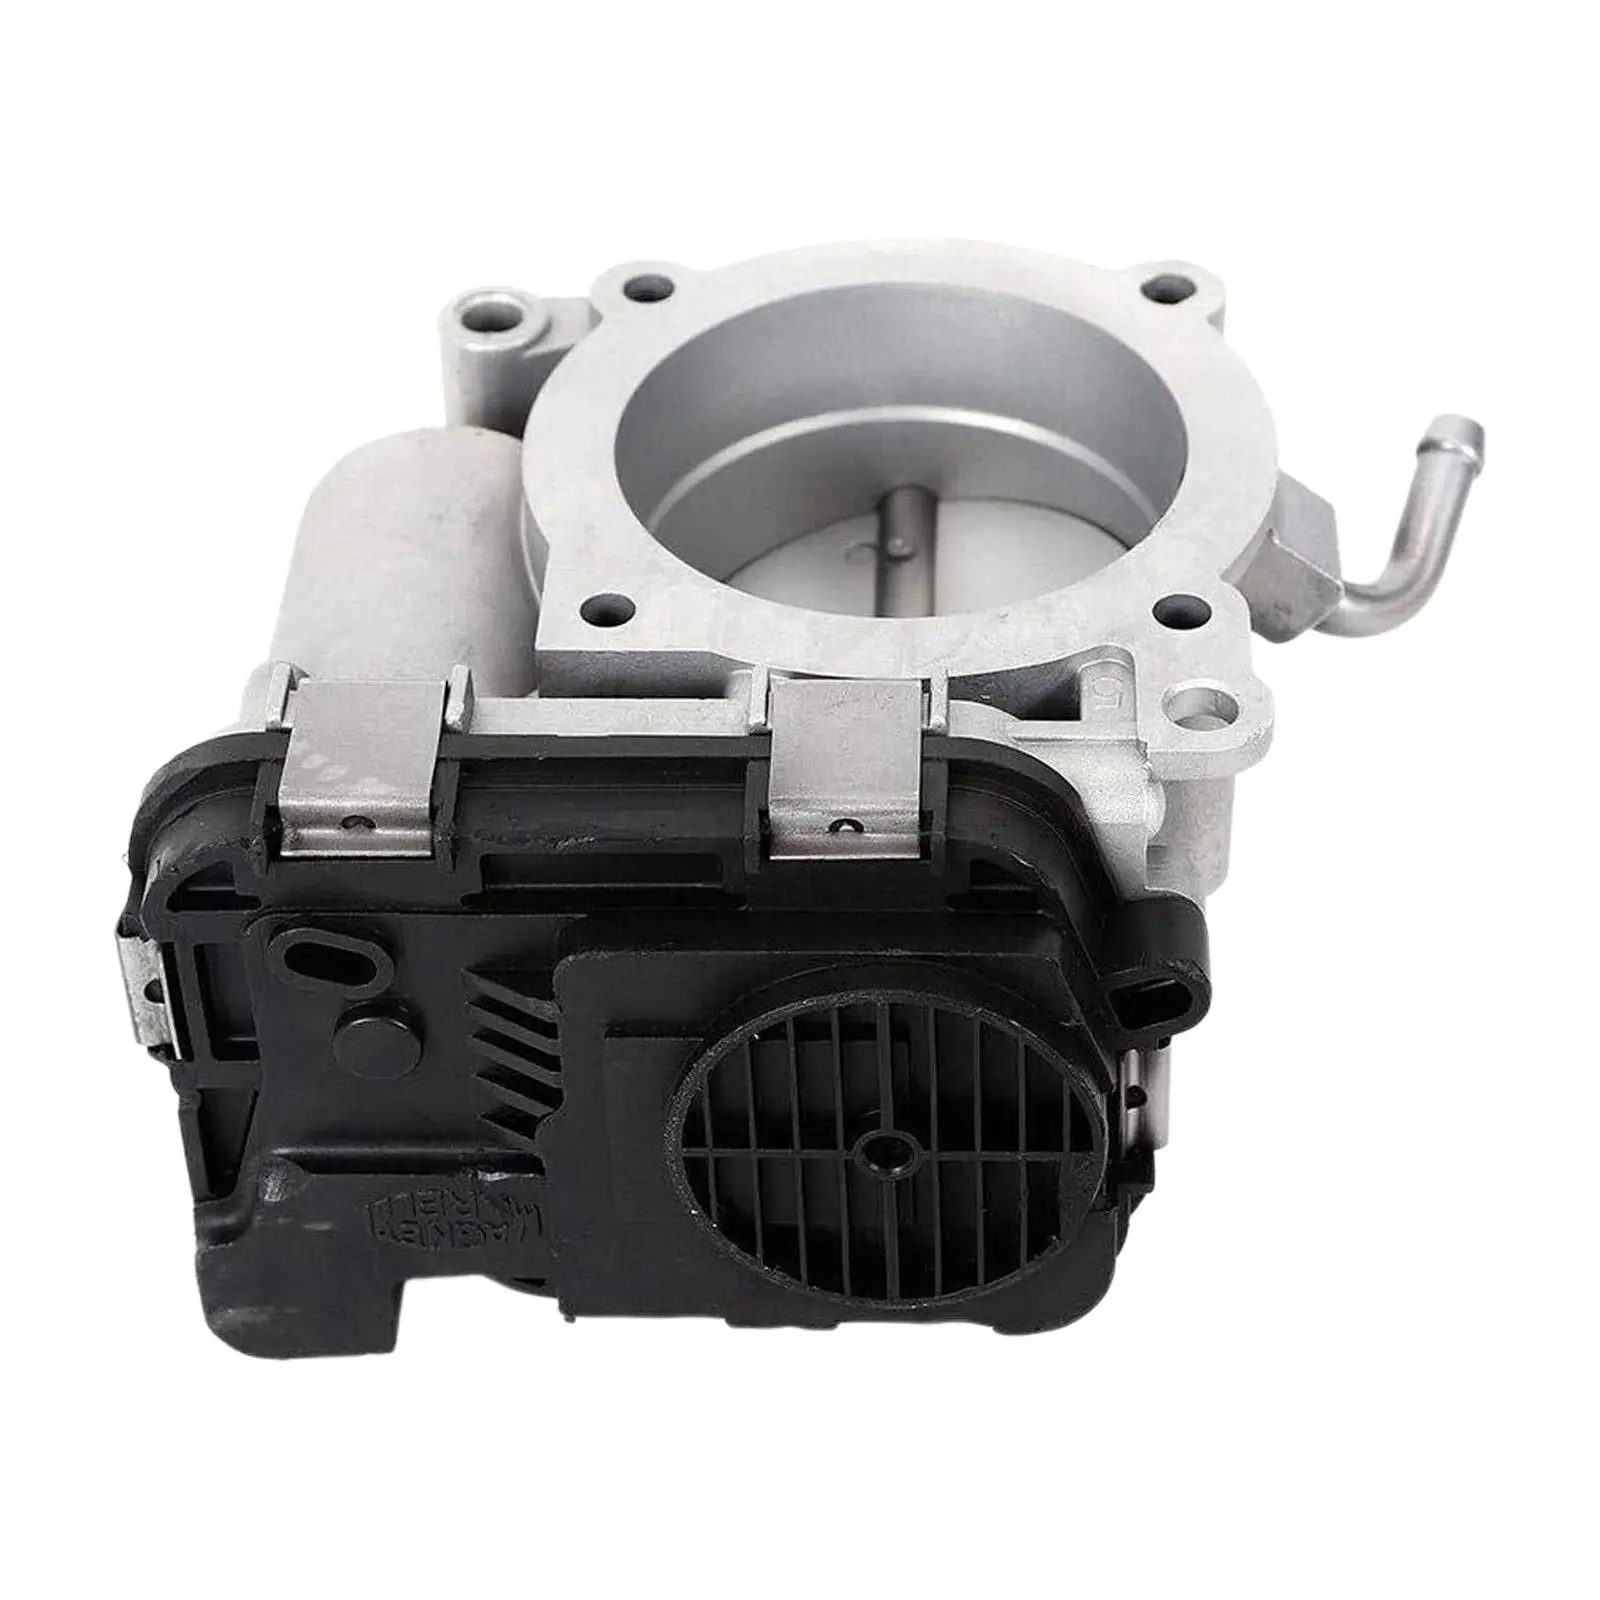 07K133062A Throttle Body Durable Repair Parts Easy Installation Spare Parts Accessory Replace for Jetta 2.5L Engines